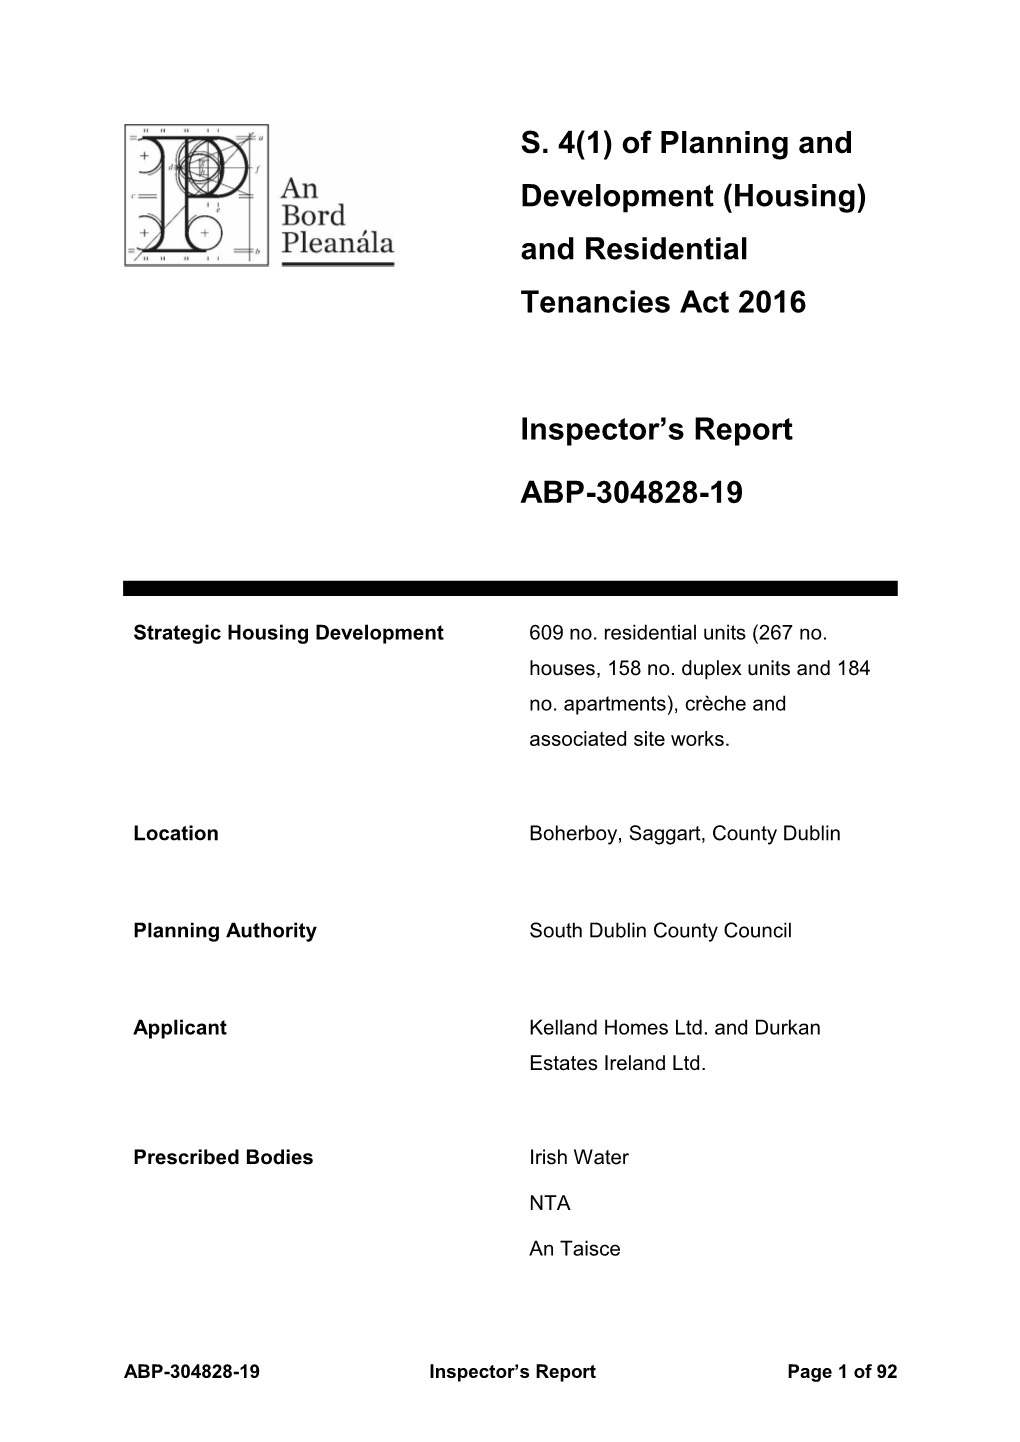 S. 4(1) of Planning and Development (Housing) and Residential Tenancies Act 2016 Inspector's Report ABP-304828-19